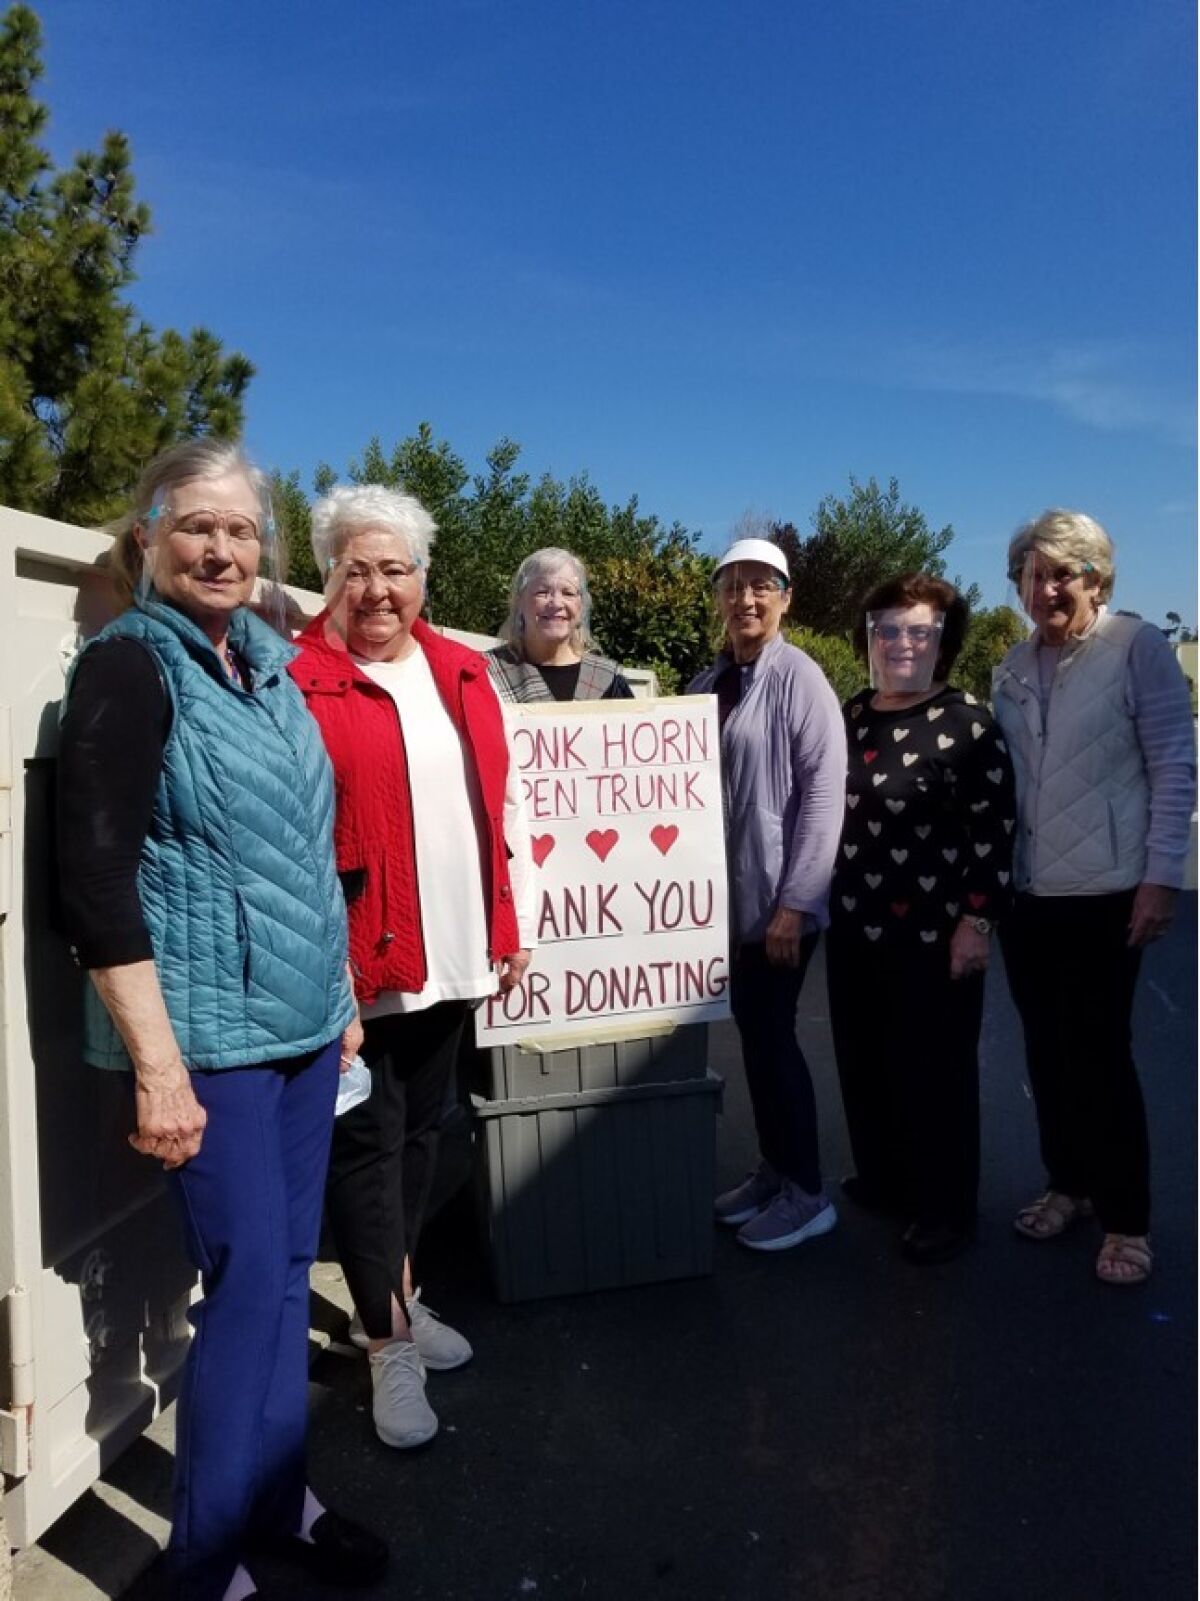 Members of the Carlsbad Newcomer’s Club “Love Your Neighbor”